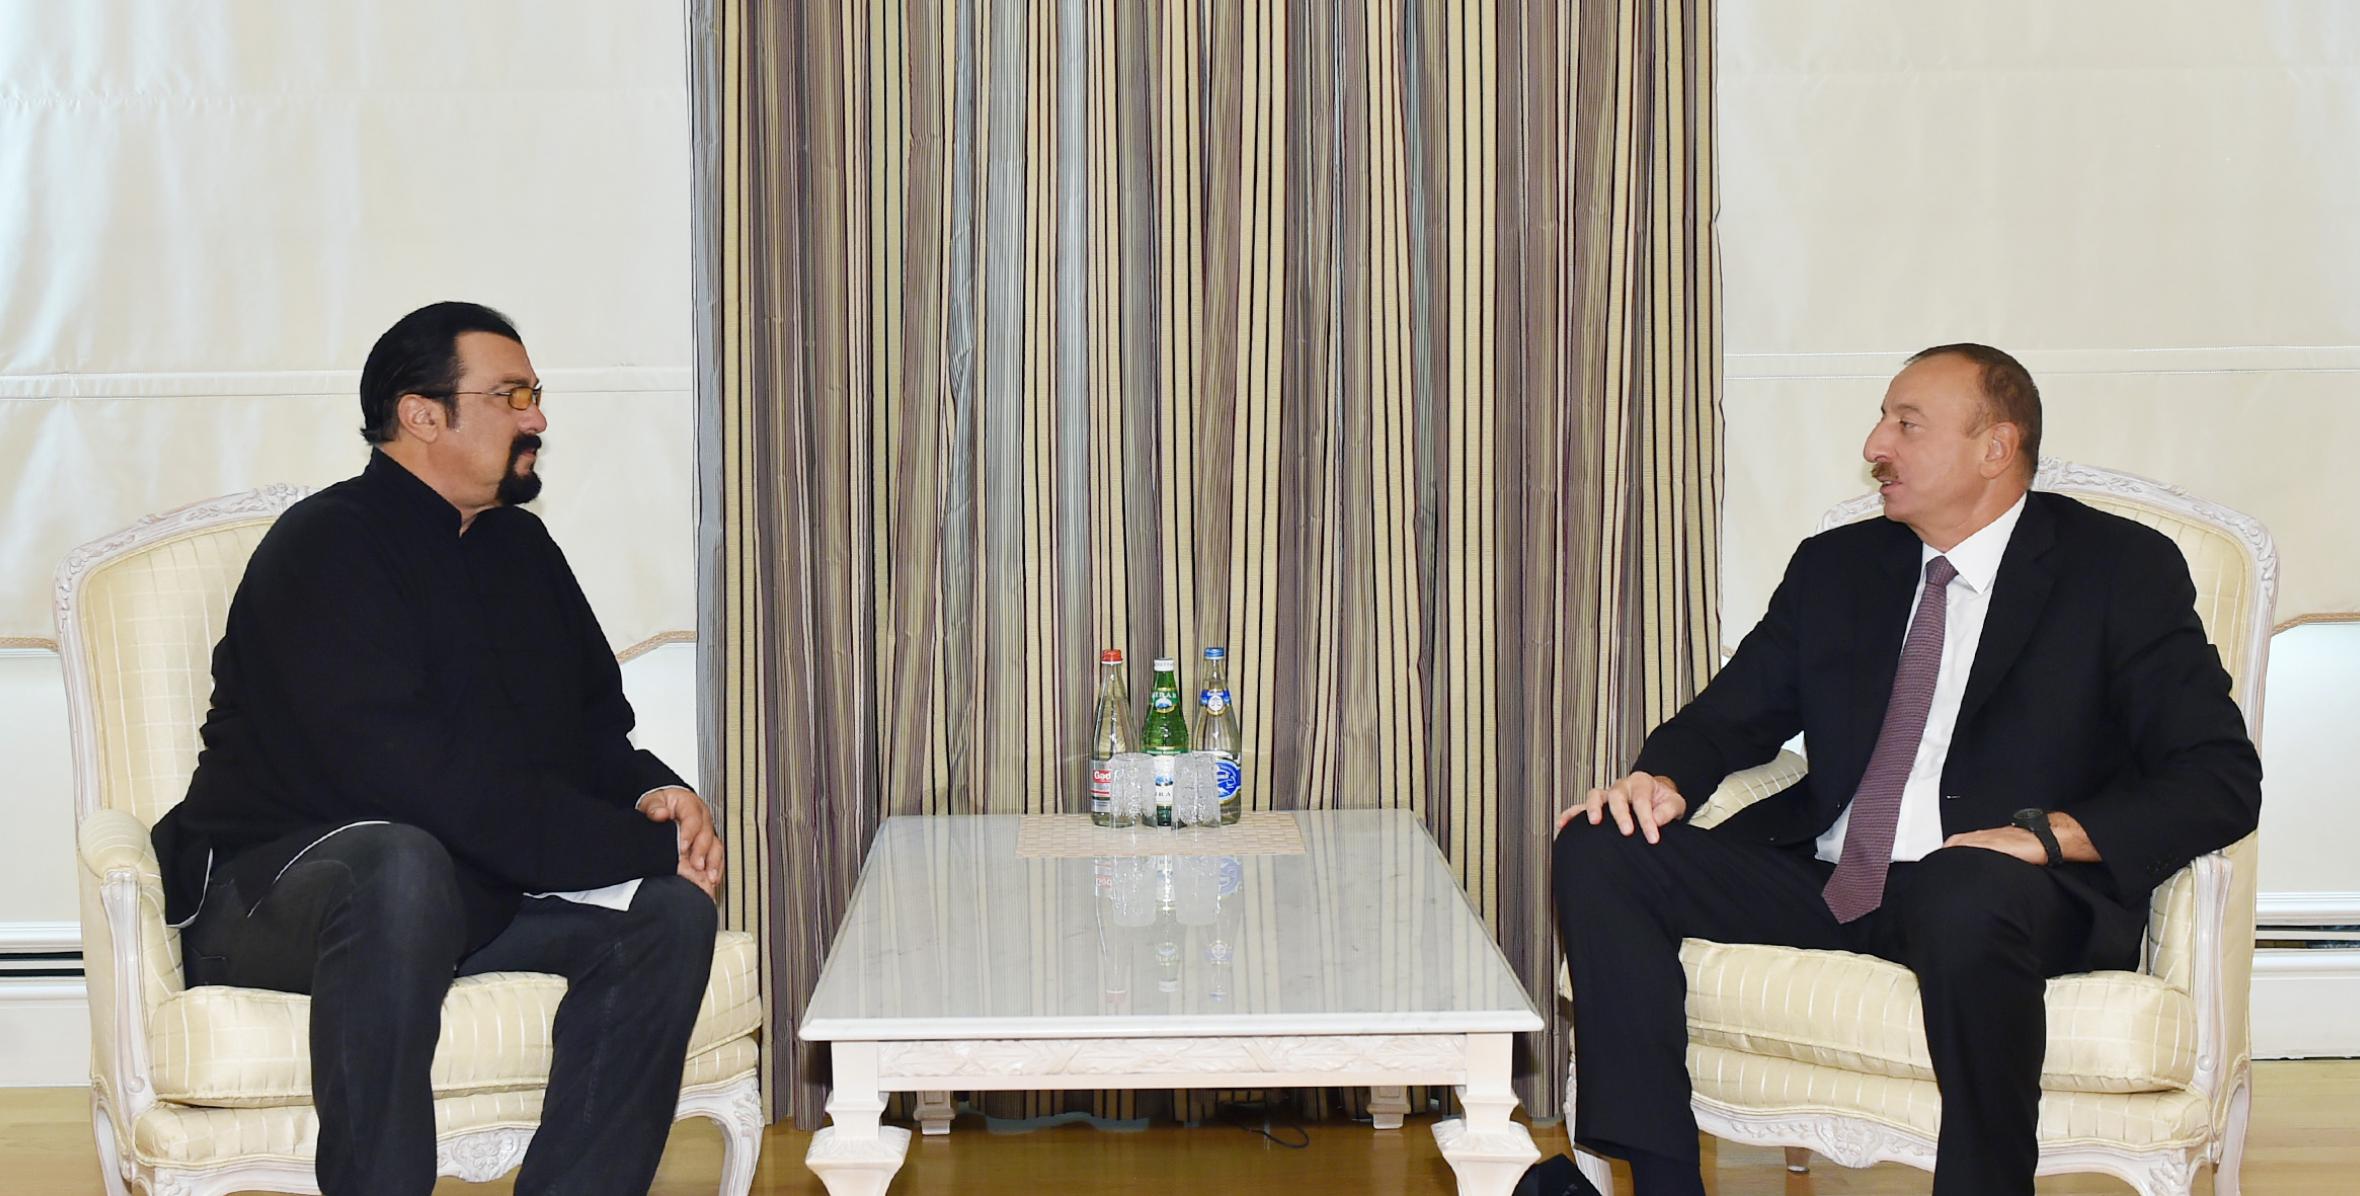 Ilham Aliyev received world famous actor and film director Steven Seagal